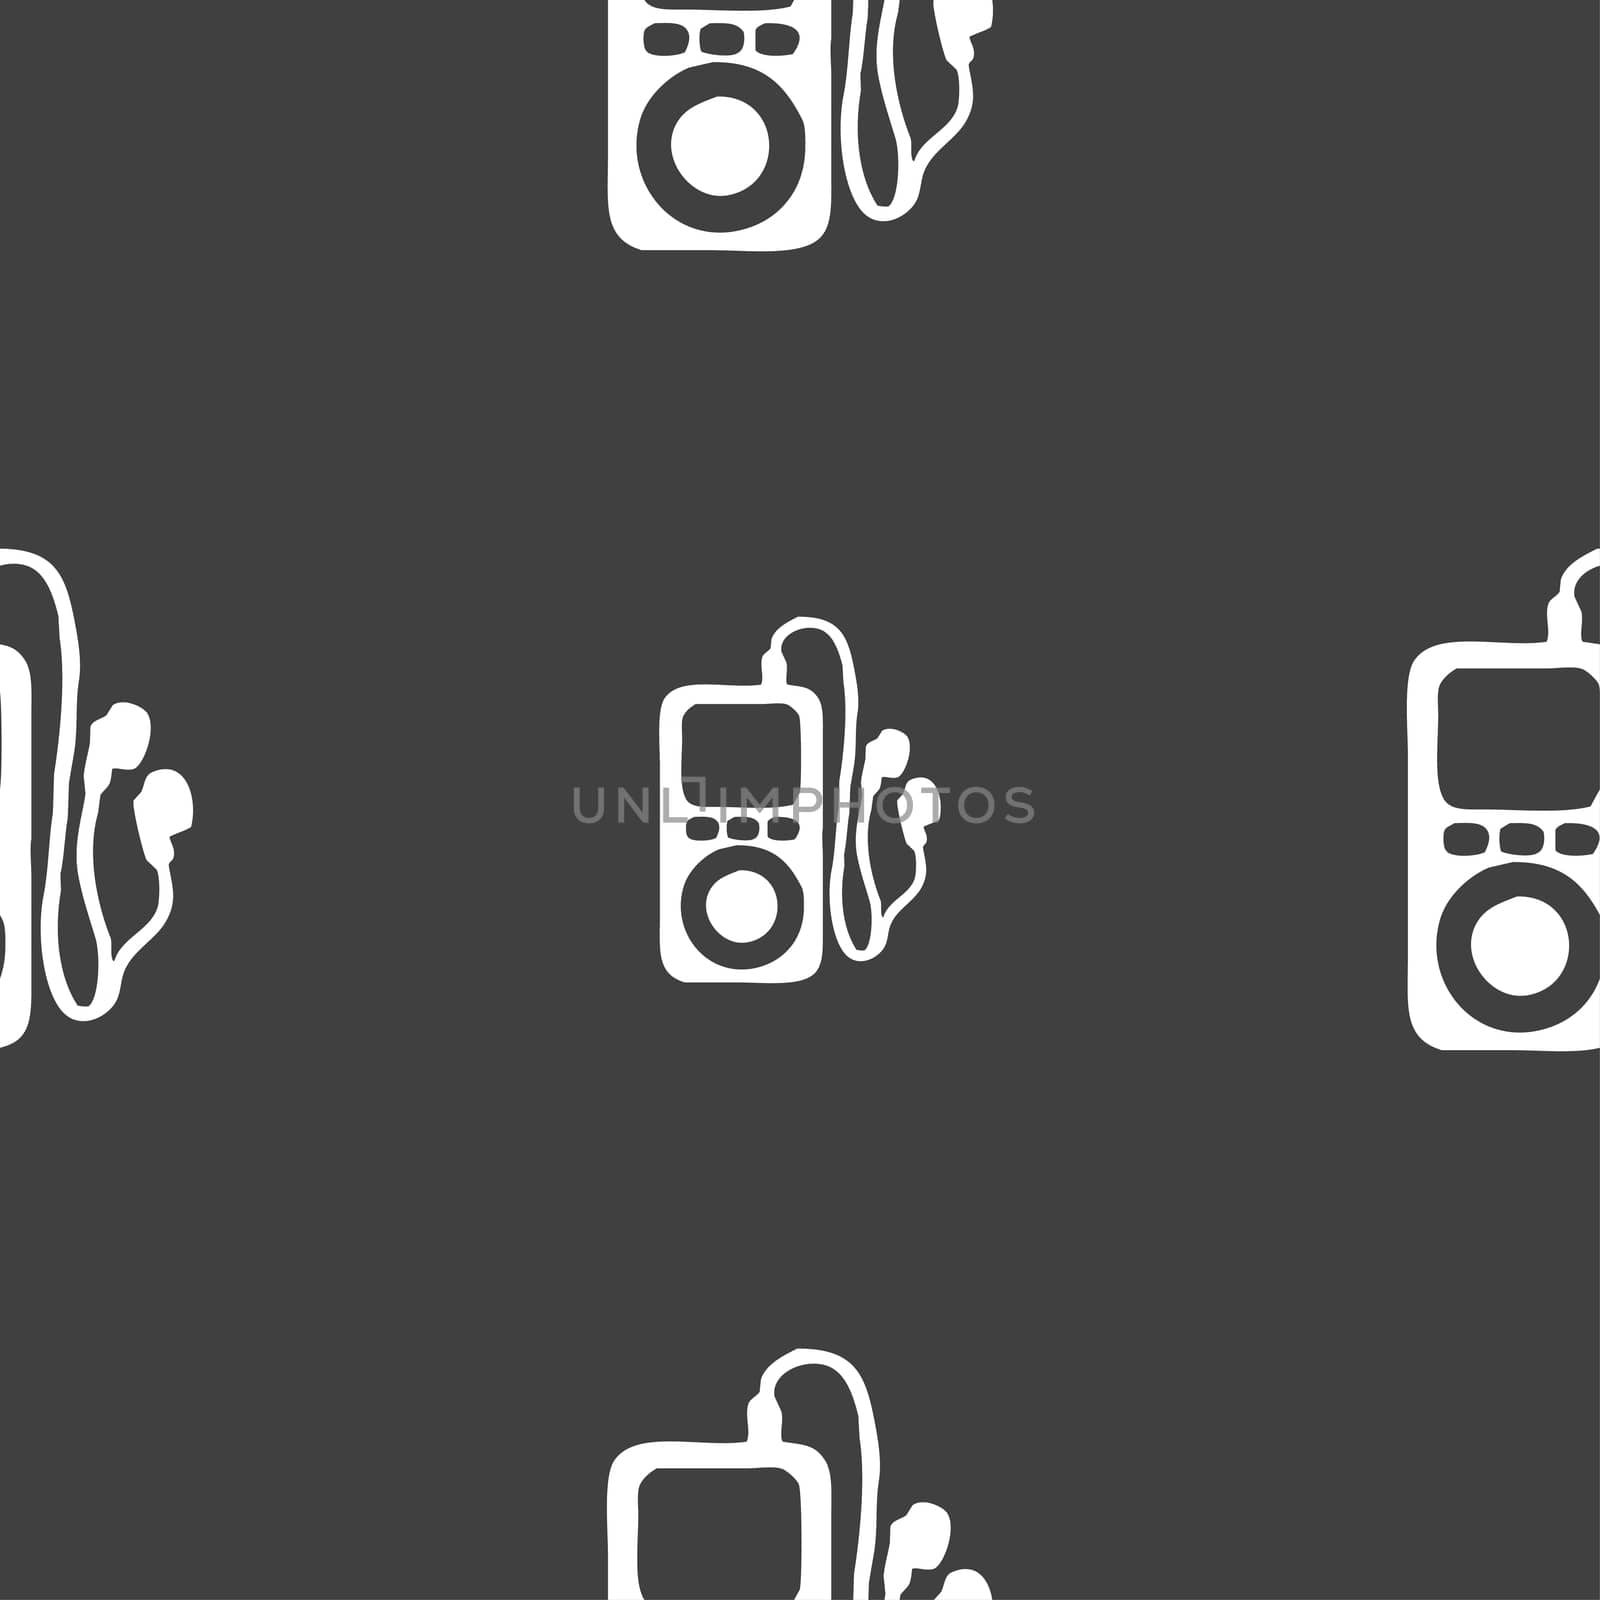 MP3 player, headphones, music icon sign. Seamless pattern on a gray background. illustration